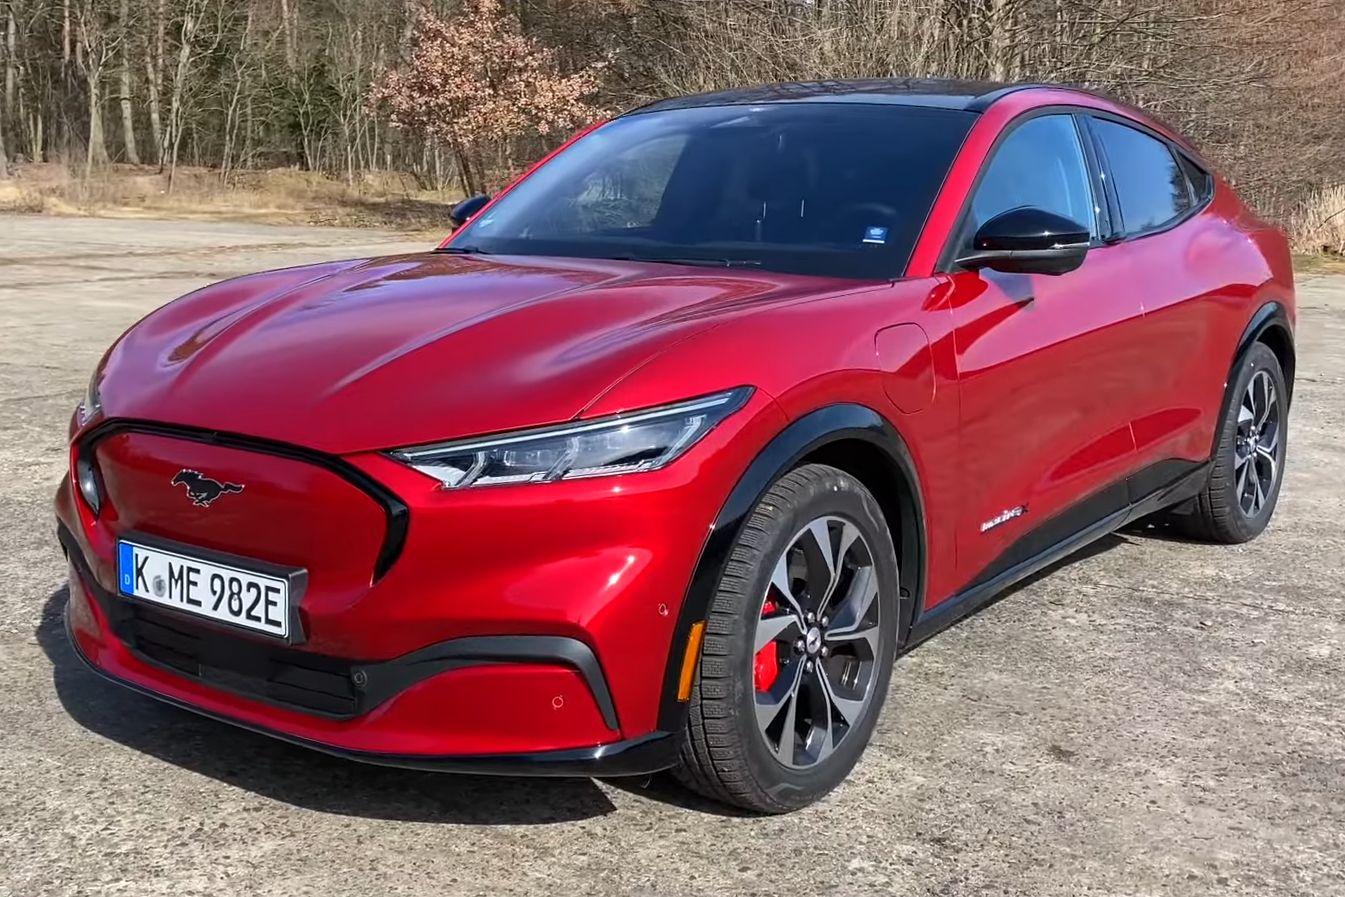 Here's How The Ford Mustang Mach-E Compares With The Jaguar I-Pace